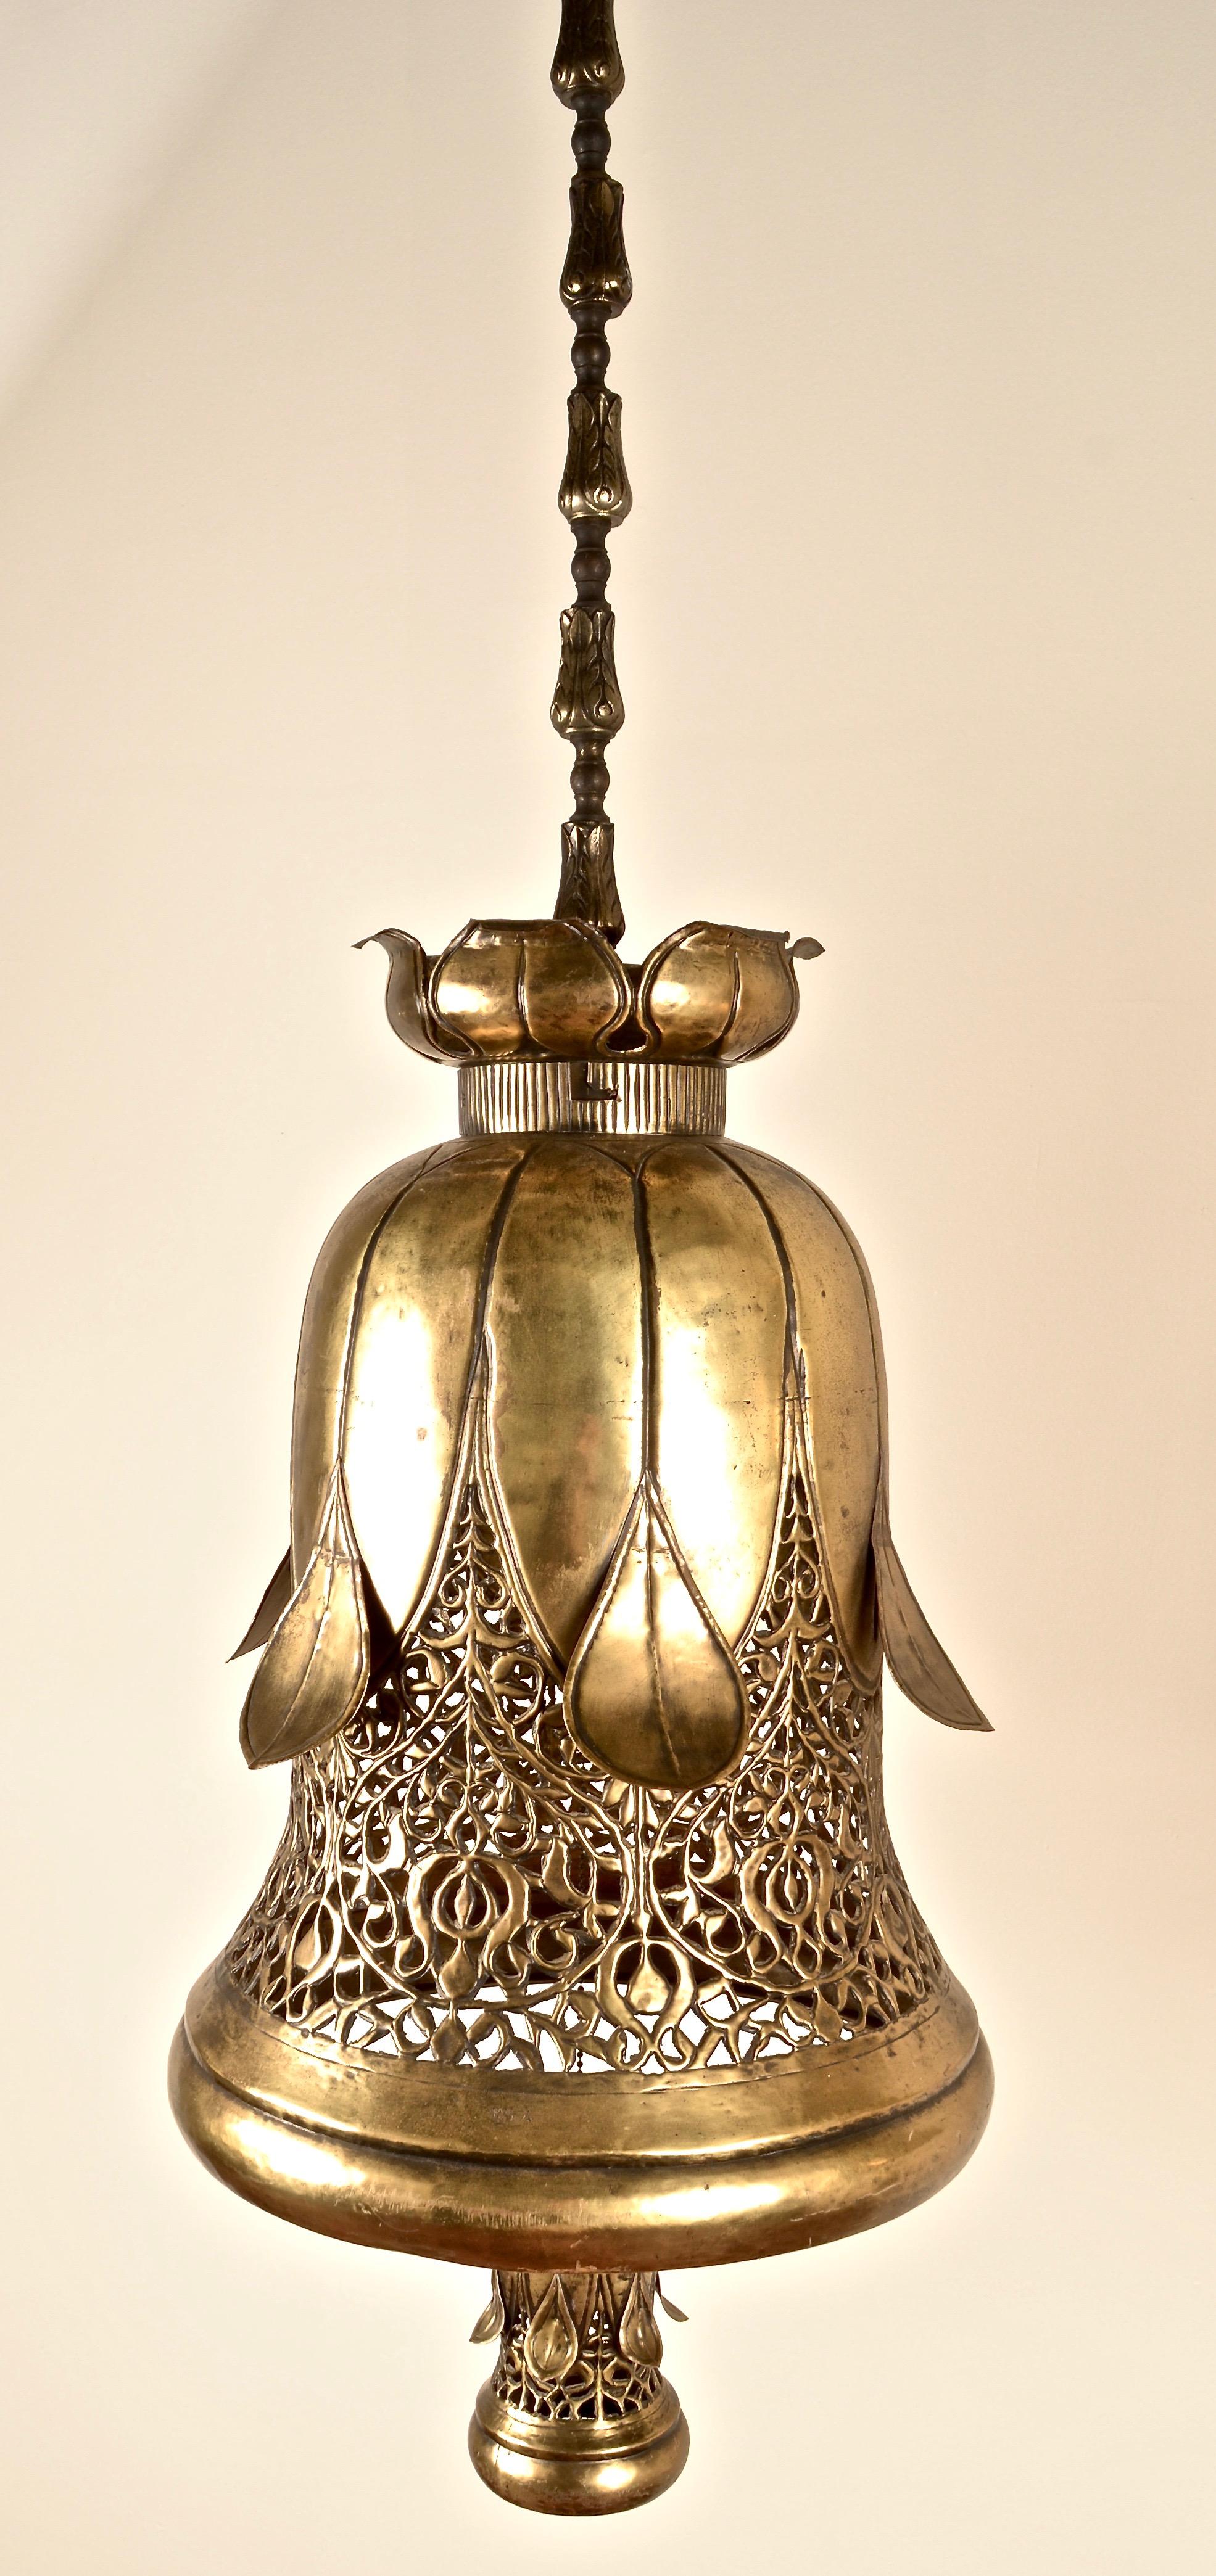 A pair of large pendants, solid brass featuring design details: great bell shape, figured and pierced sides, lotus flower design tops, molded drop chains, mini-replica on/off pulls, and best of all terrific size. The 